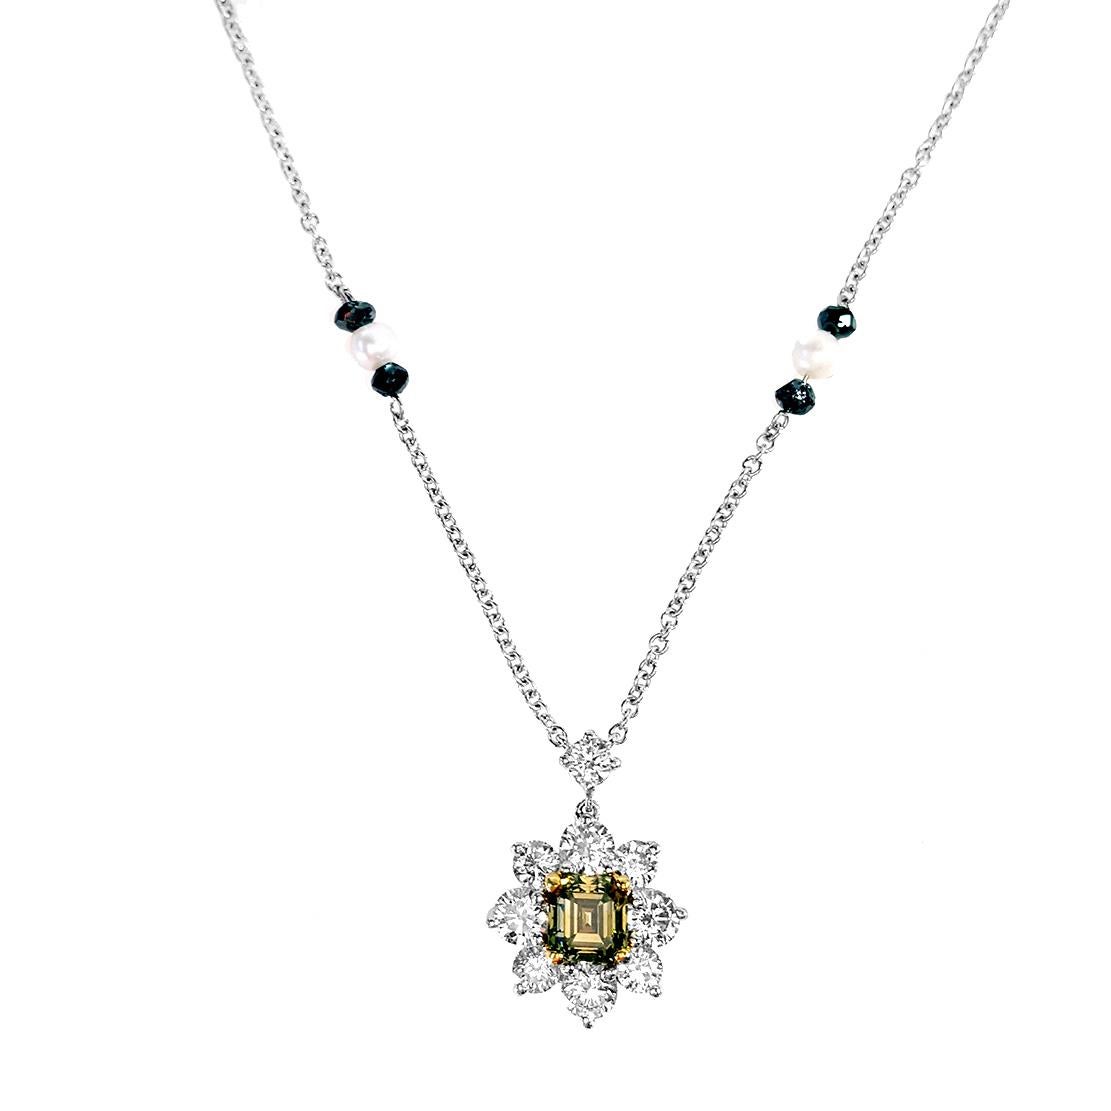 Featuring a stunning 0.50 carat emerald cut FANCY DARK
GRAY-GREENISH YELLOW diamond pendant necklace. certified by GIA as ‘CHAMELEON’. dropping from one round brilliant cut diamond and surrounded by 9 round brilliant white diamonds F color VS